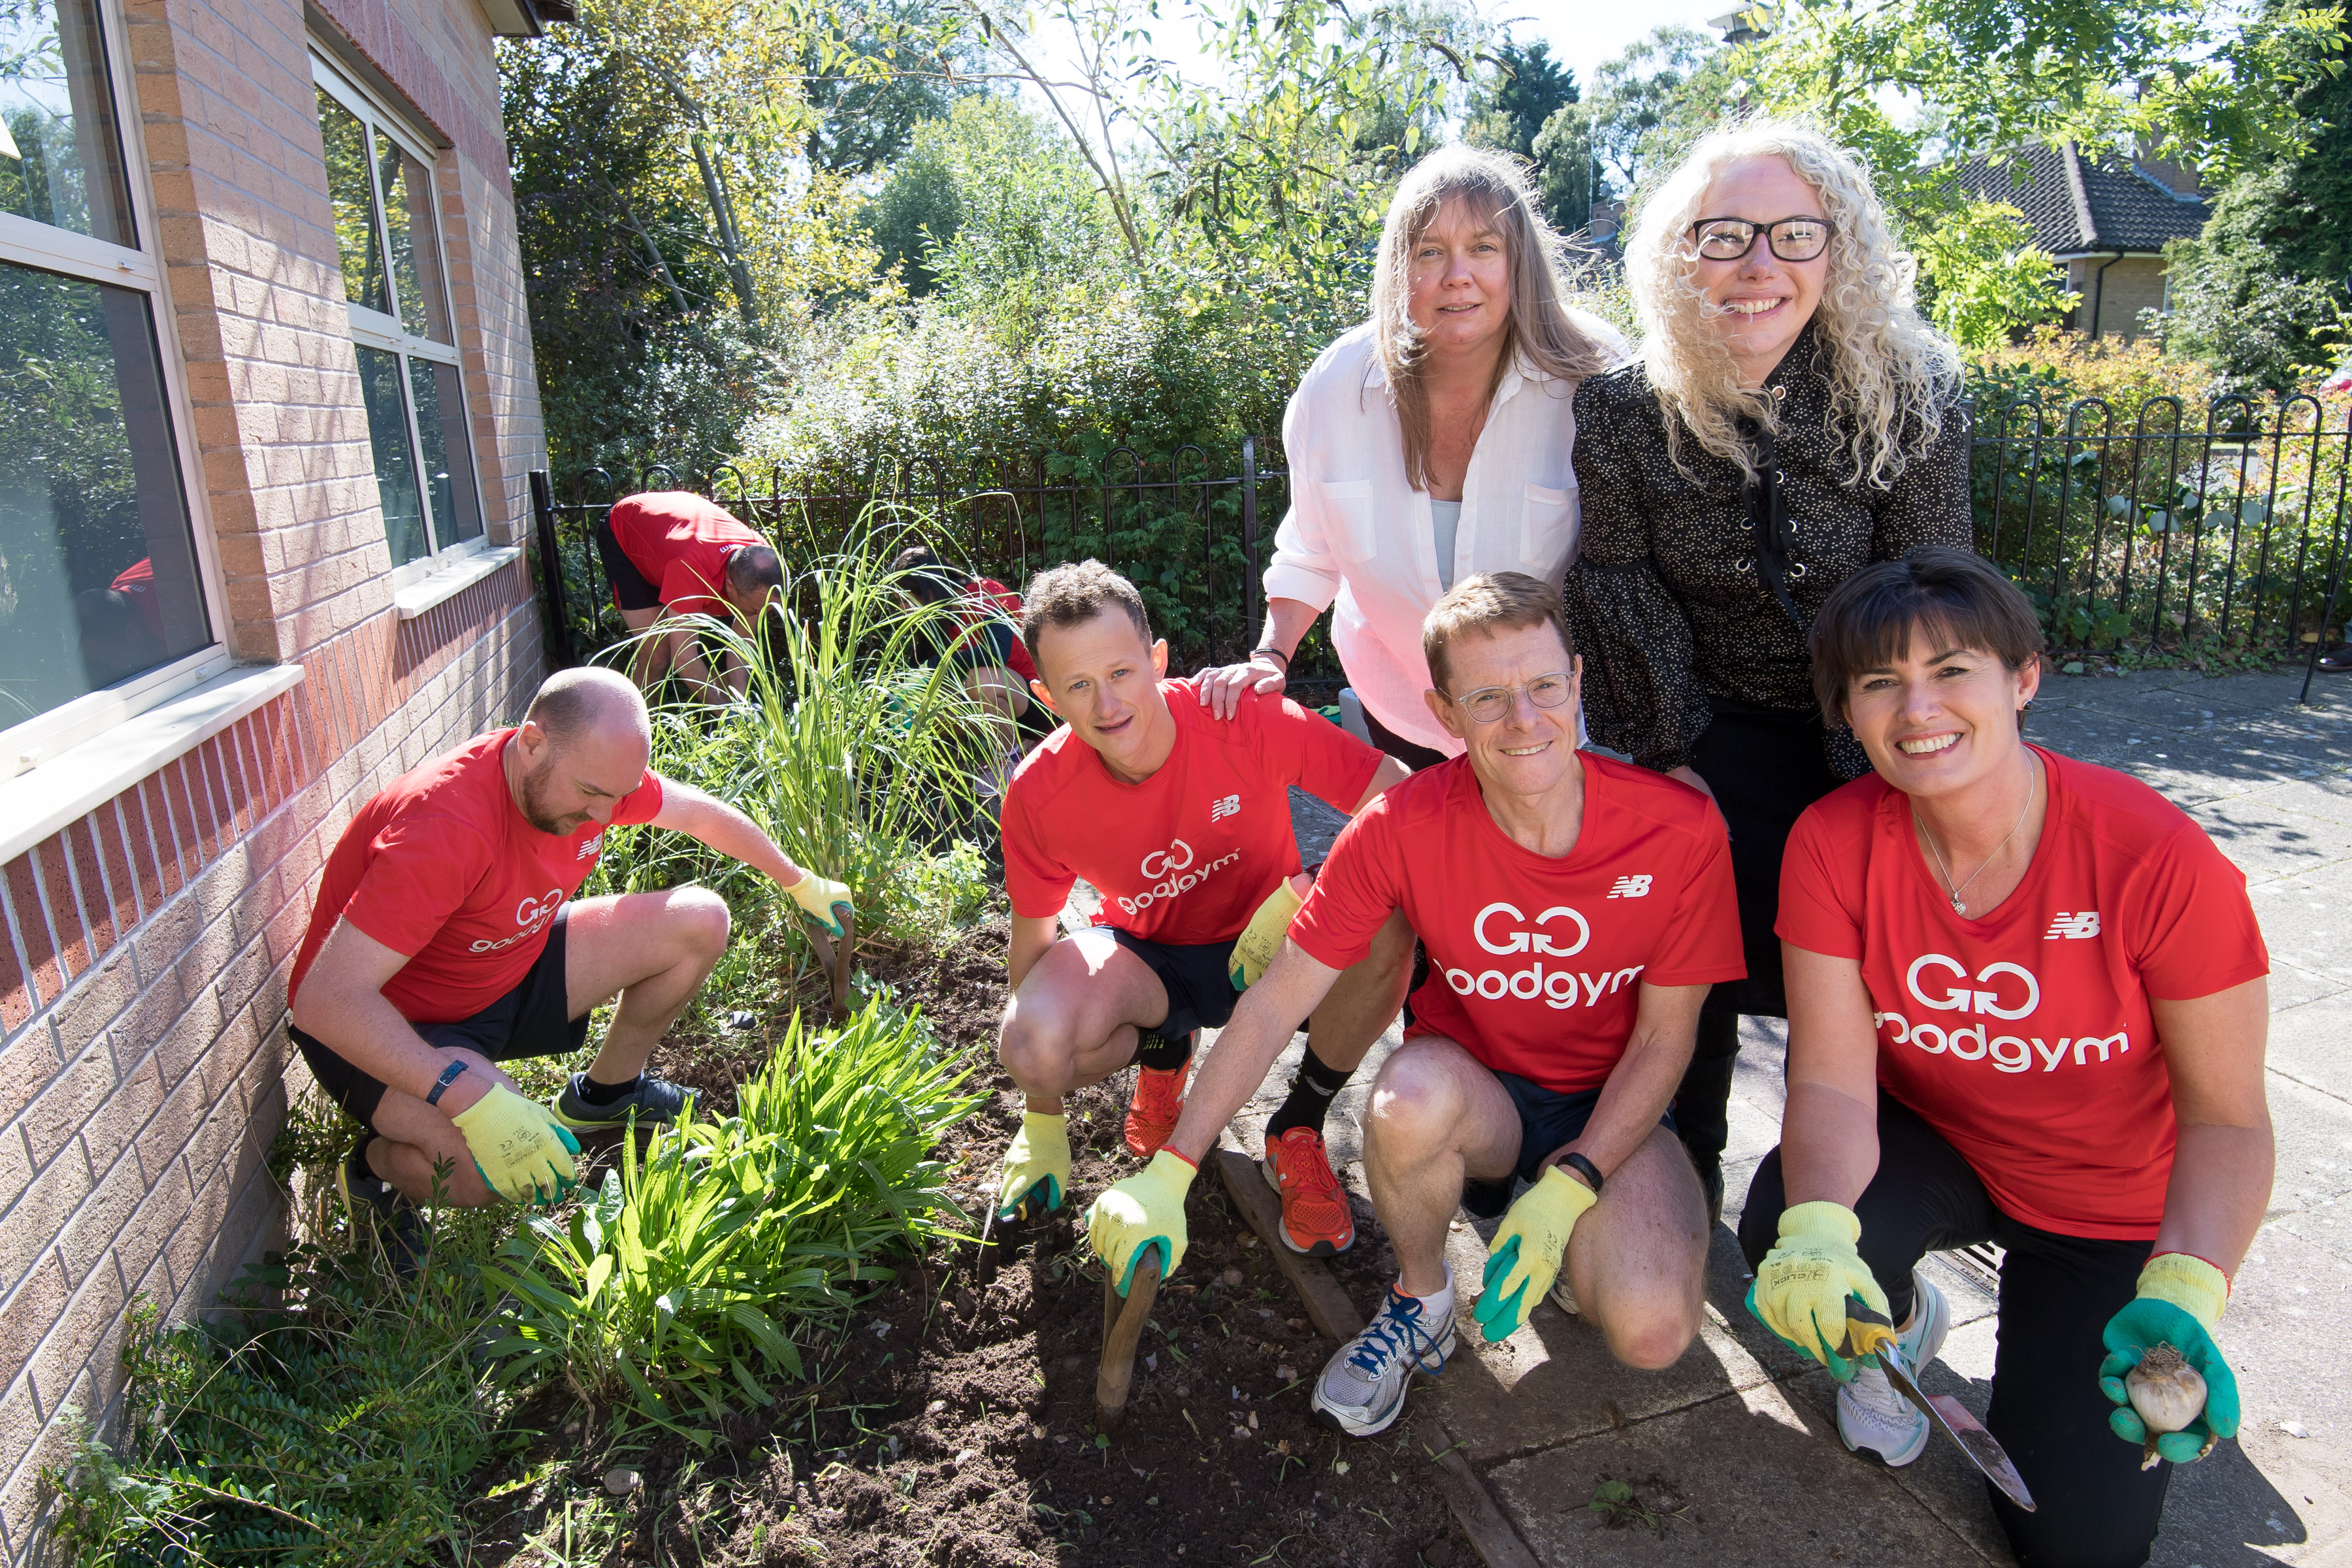 Mayor of the West Midlands Andy Street (front, second from right) joins GoodGym runners to help at a community project